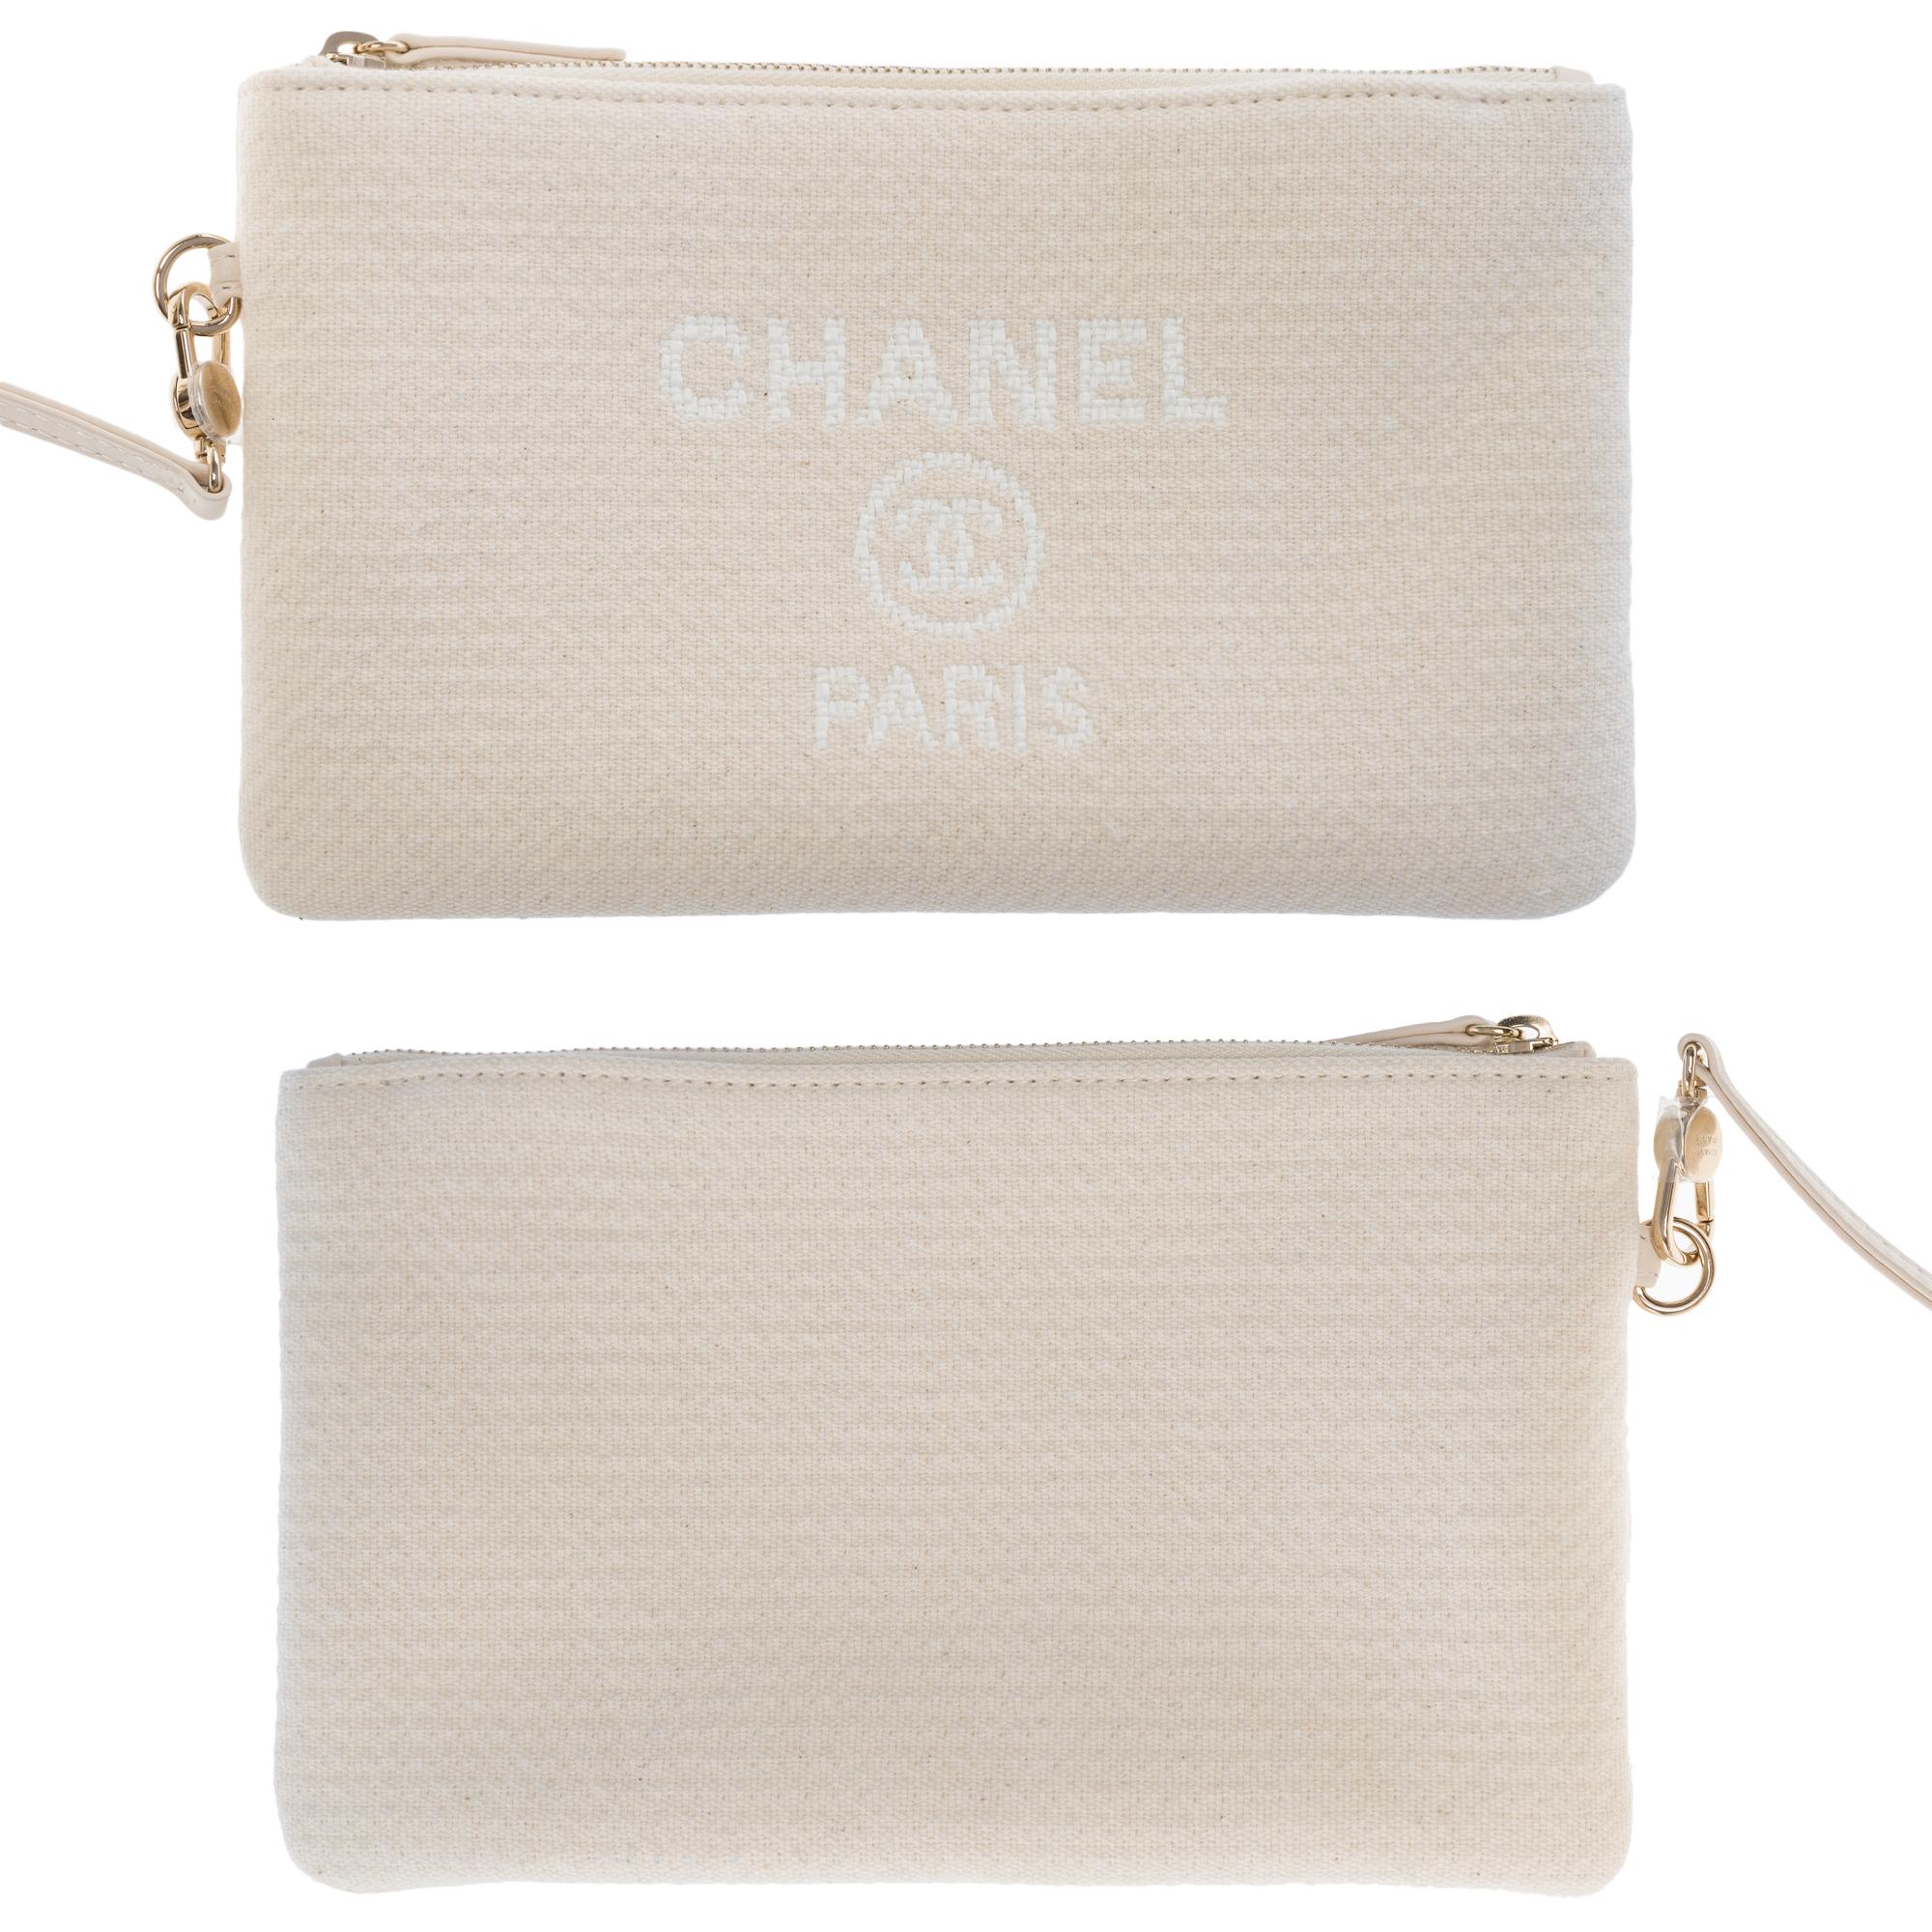 Amazing Chanel Deauville tote bag in off white canvas, SHW For Sale 11